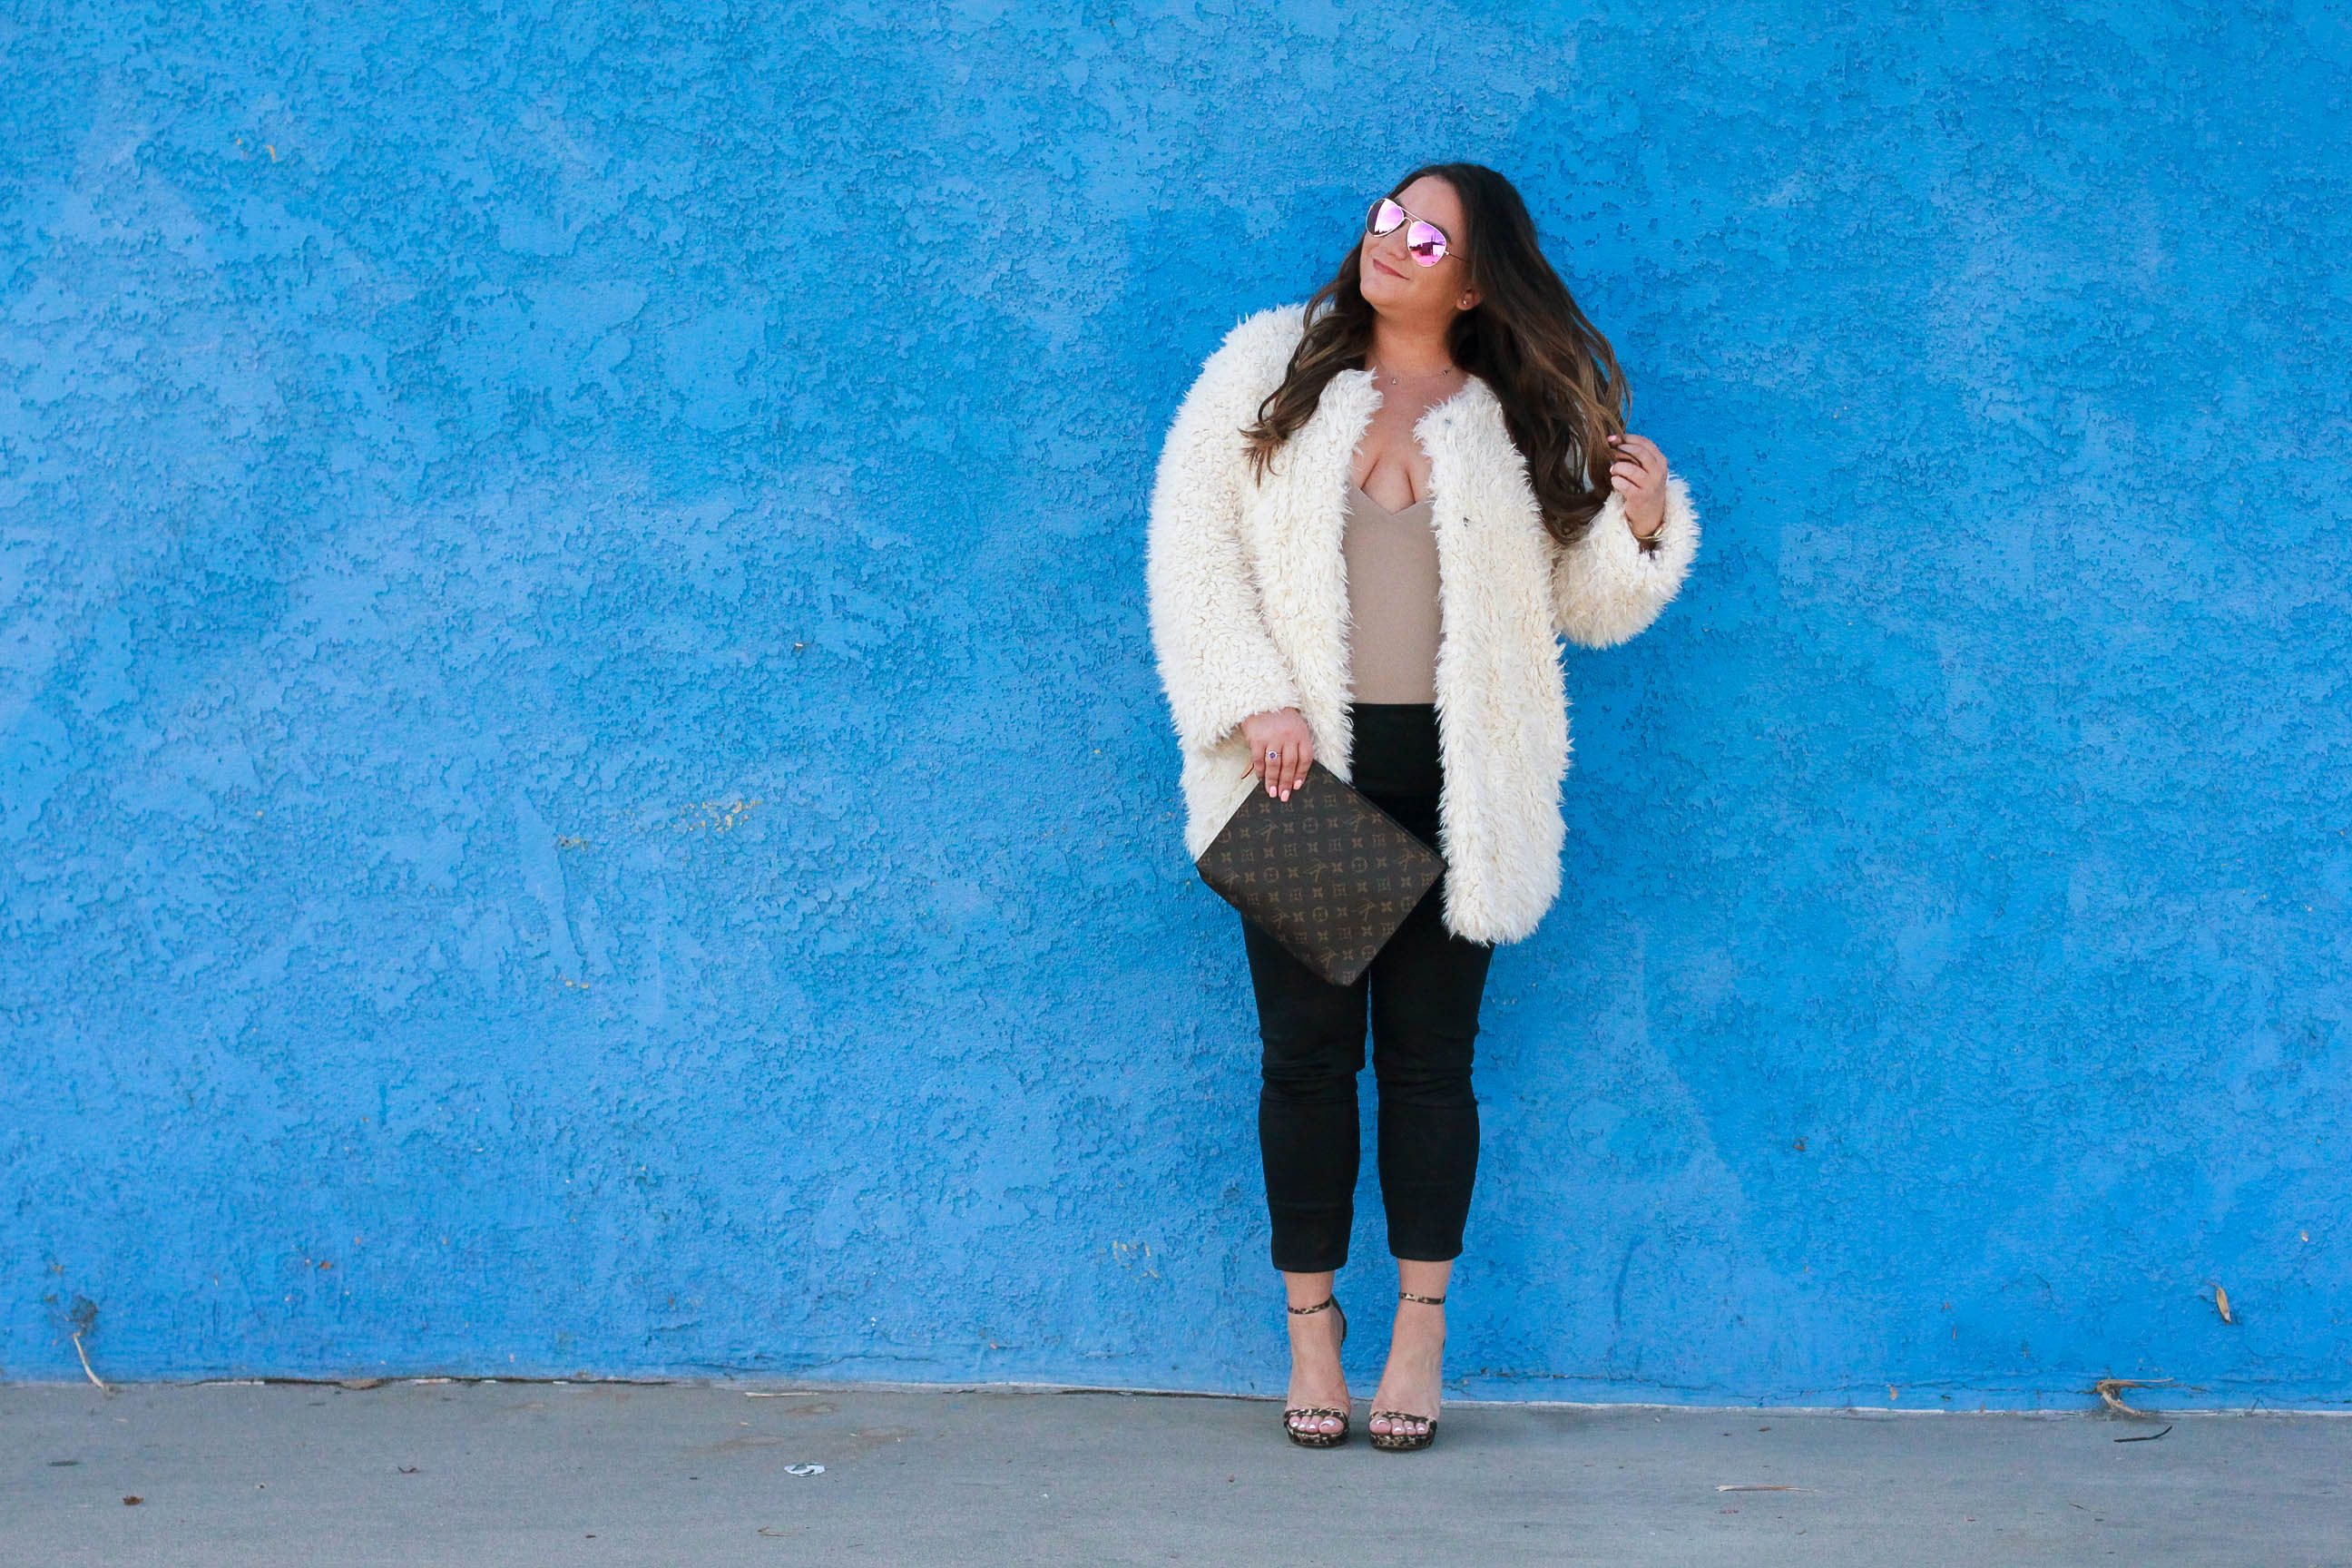 missyonmadison, missyonmadison blog, missyonmadison instagram, fashion blog, fashion blogger, white fuzzy coat, white coat, kendall and kylie coat, kendall and kylie fuzzy coat, leopard ankle strap sandals, leopard heels, leopard ankle strap heels, spanx, spanx leggings, spanx leather leggings, diff eyewear, diff eyewear pink aviators, pink aviators, bloglovin, la blogger, style blog, style blogger, melissa tierney, winter style, winter style inspo, winter outfit ideas, date night outfit, shaggy coat, fuzzy coat, teddy bear coat, v neck body suit, nude v neck body suit, louis vuitton clutch, louis vuitton toiletry pouch 26, louis vuitton toiletry pouch, style inspo,